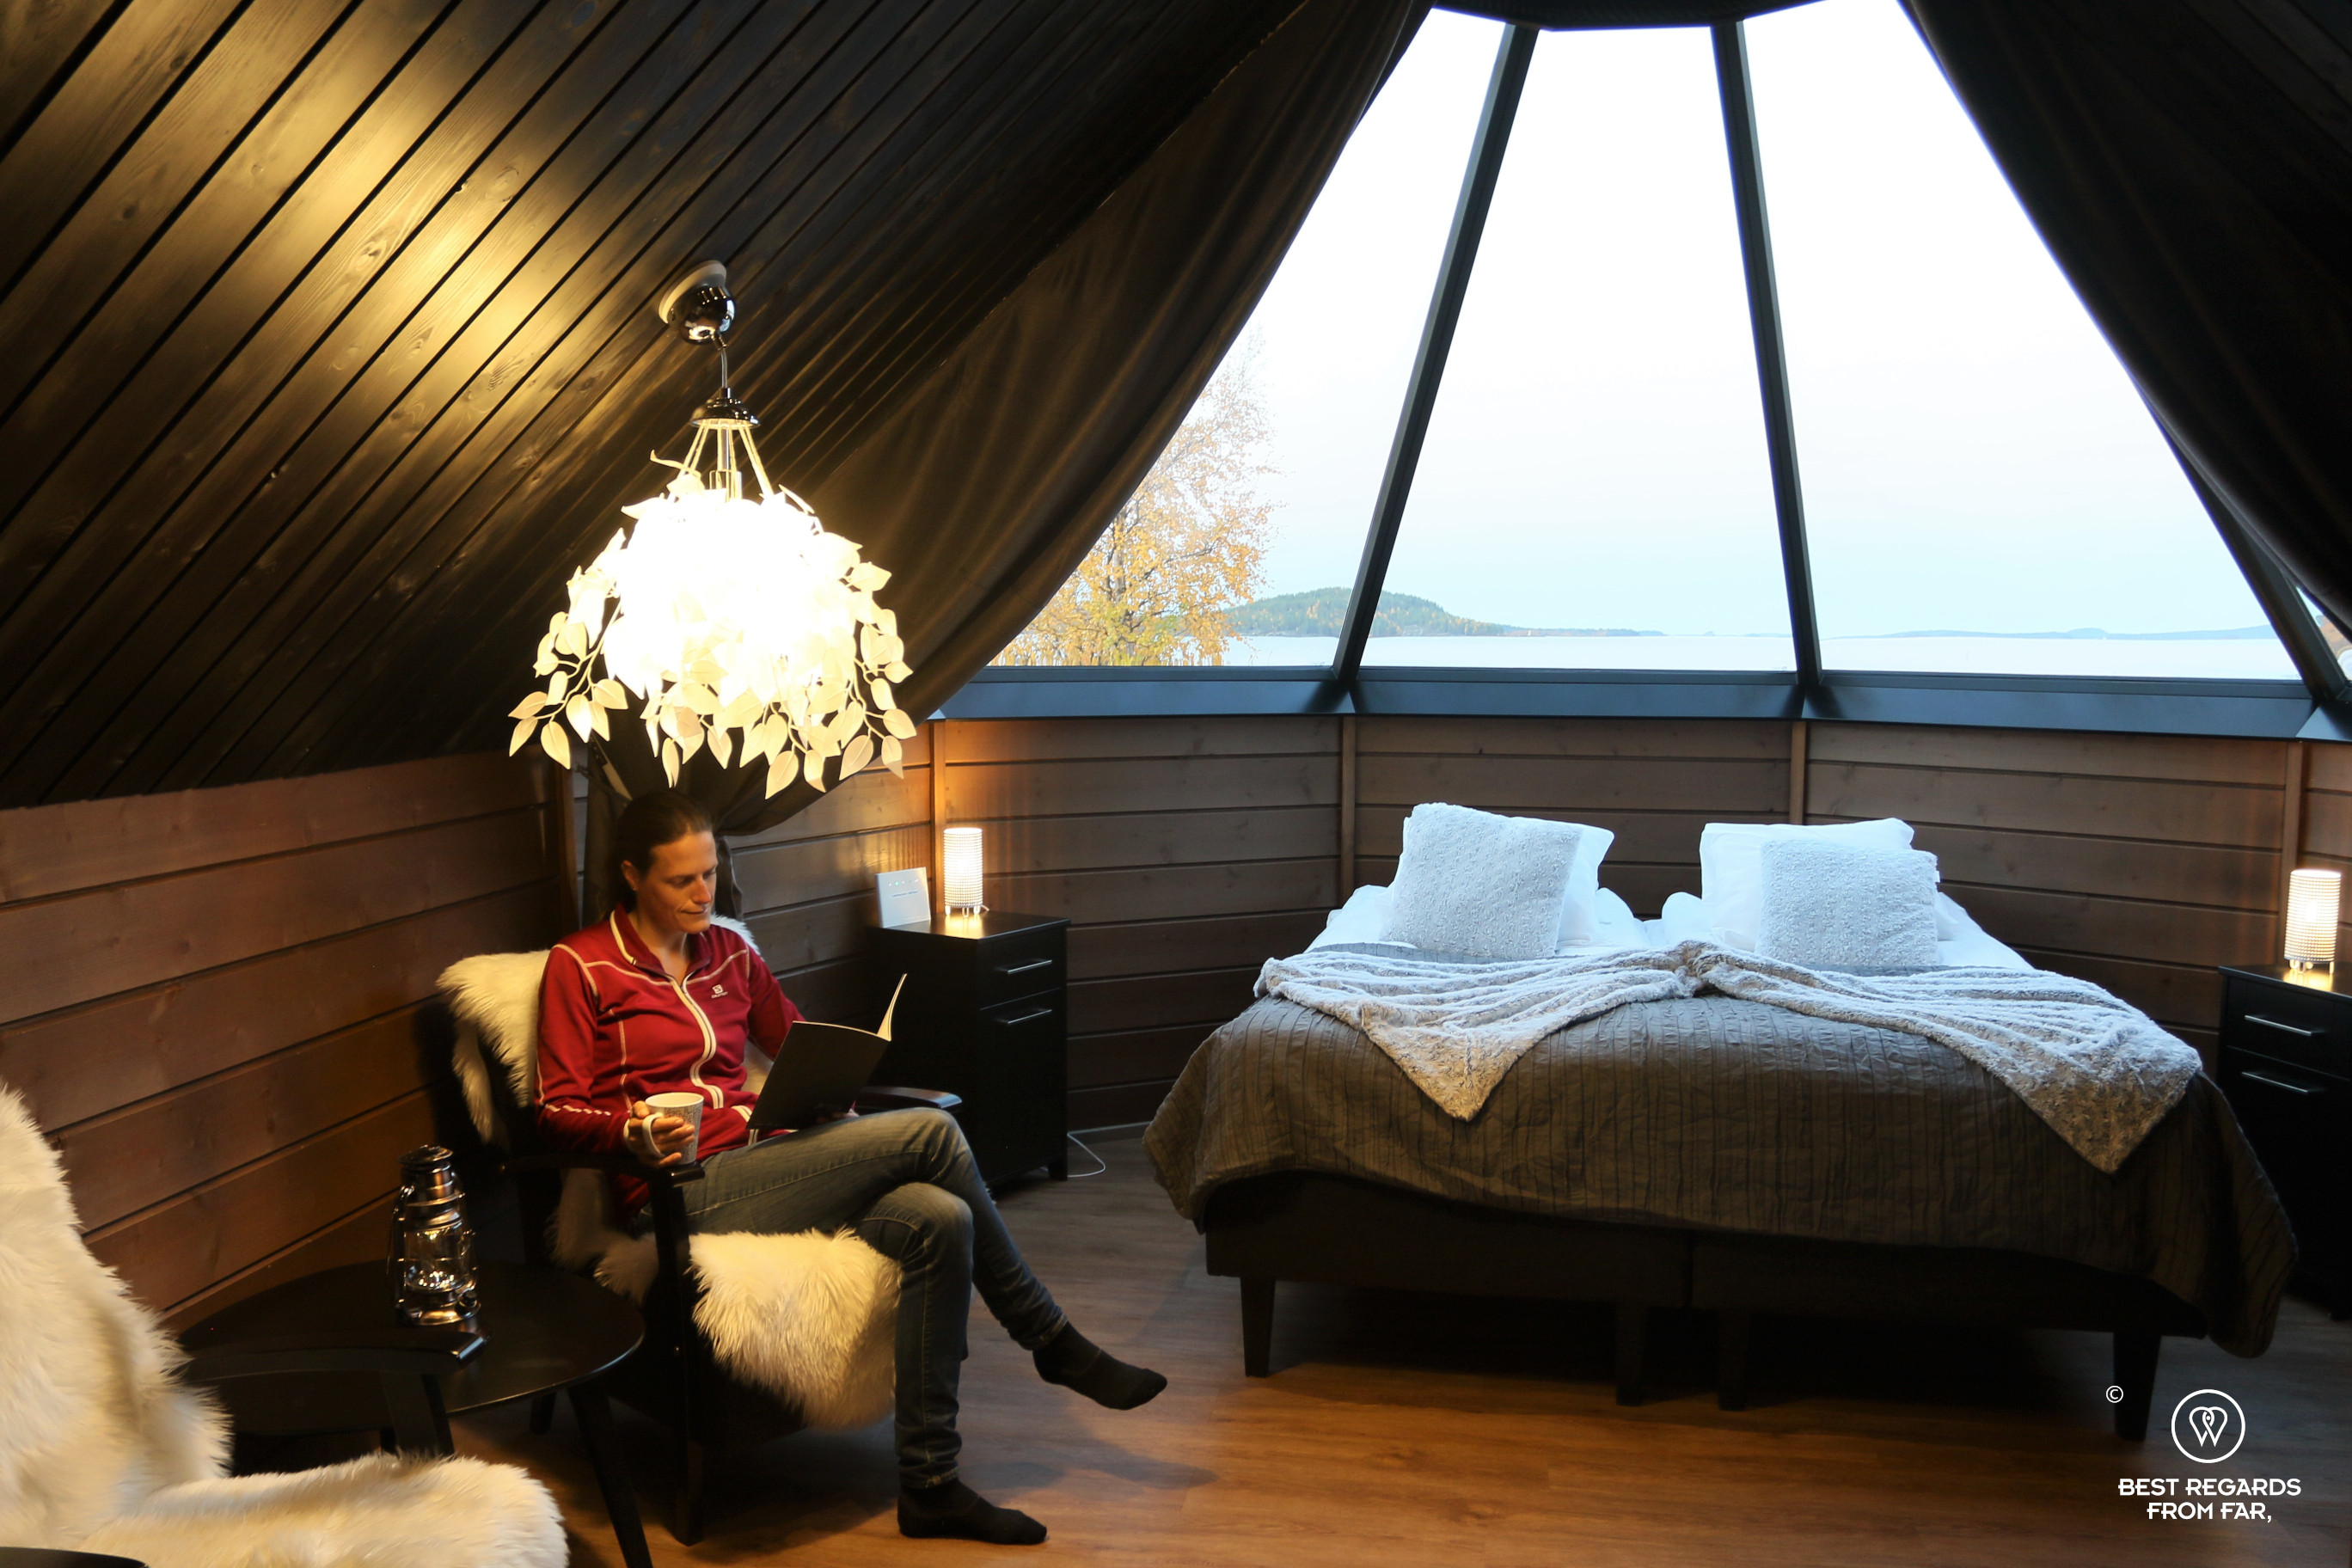 Waiting for the Northern Lights in an aurora cabin at Inari Holiday Village